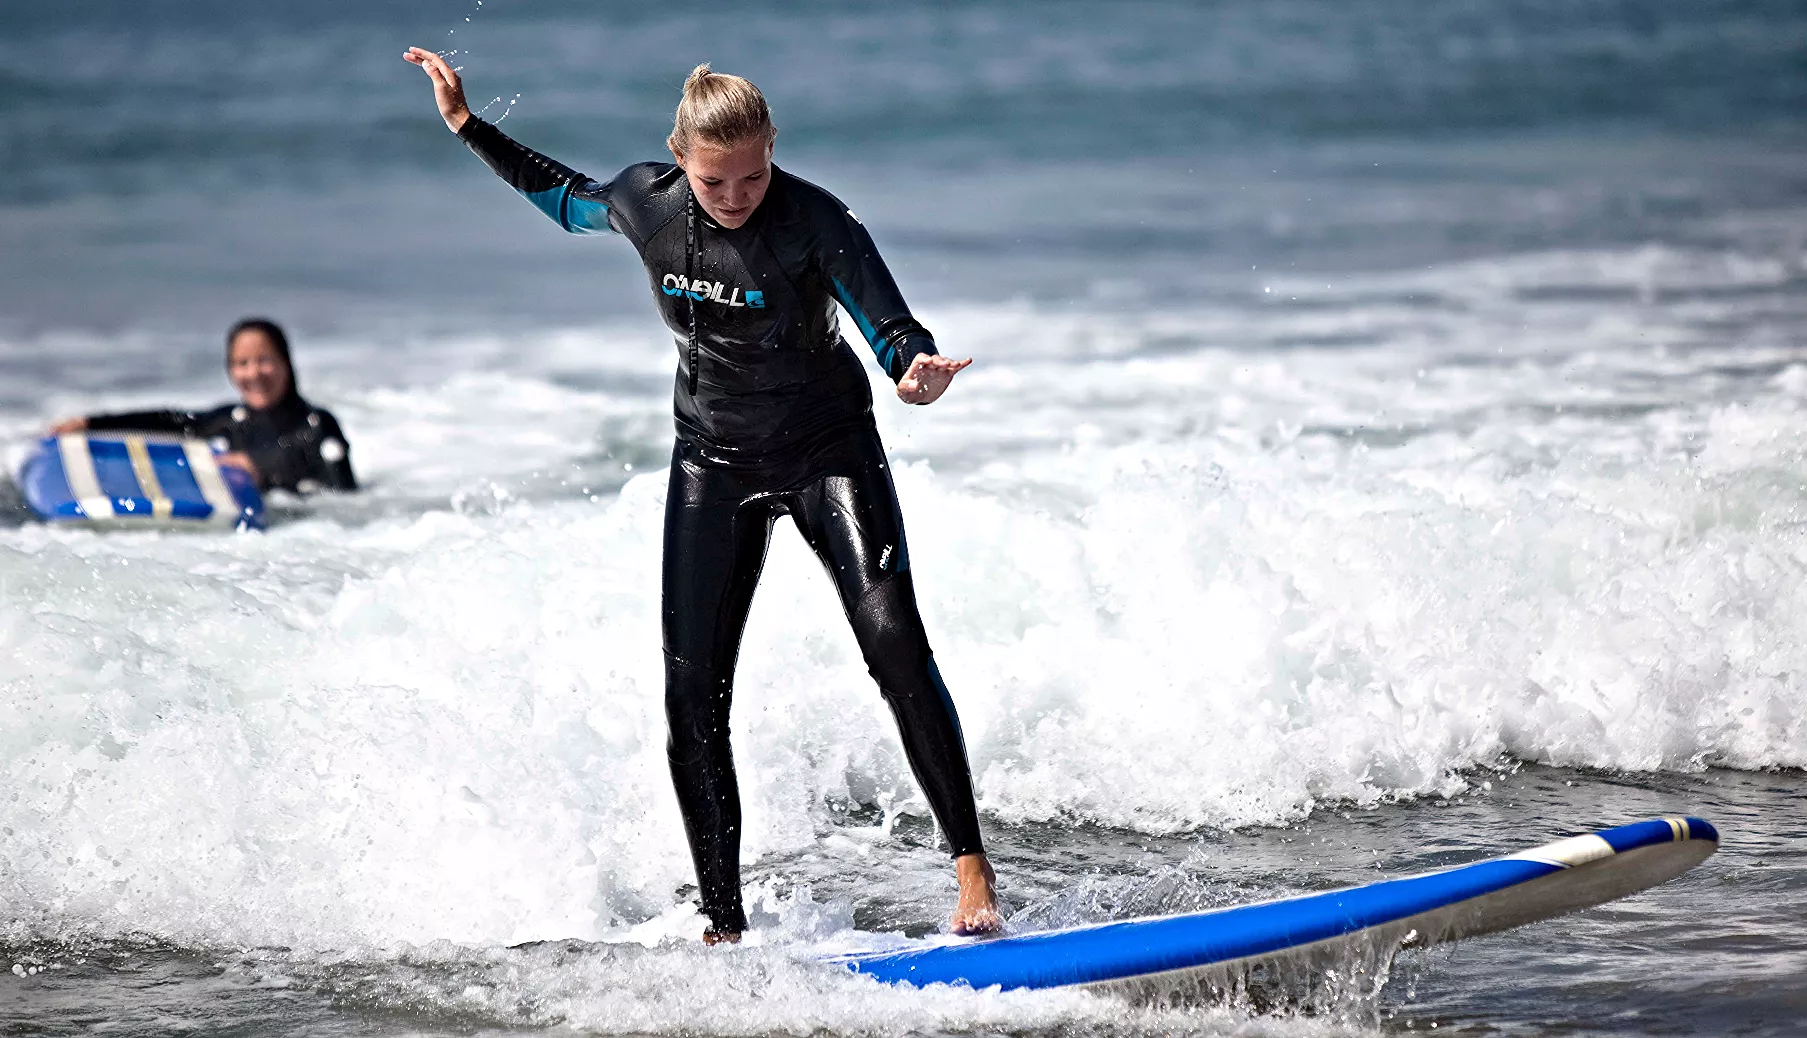 Kapowui Surf Lessons in USA, North America | Surfing - Rated 4.3